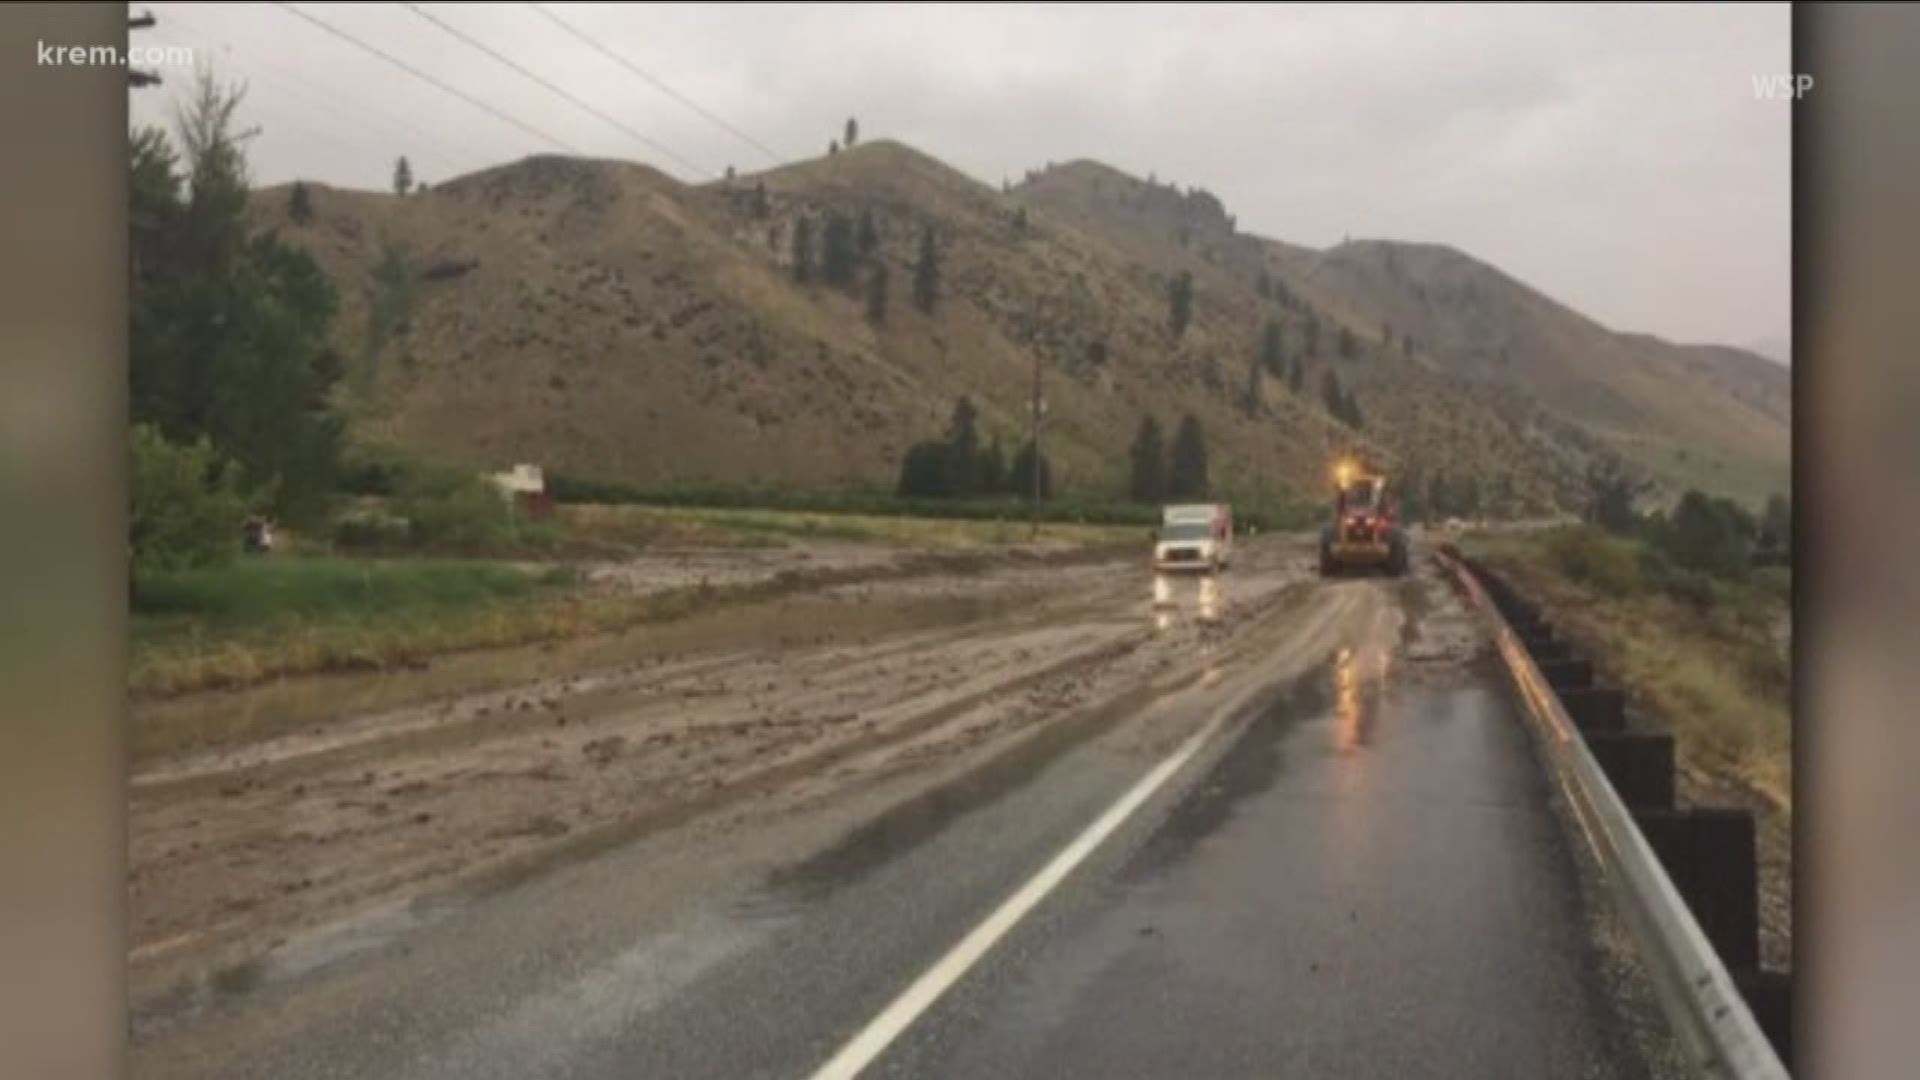 According to Washington State Patrol Trooper John Bryant, Highway 97 from just north of Entiat to 9 miles south of Chelan is closed due to a mudslide.